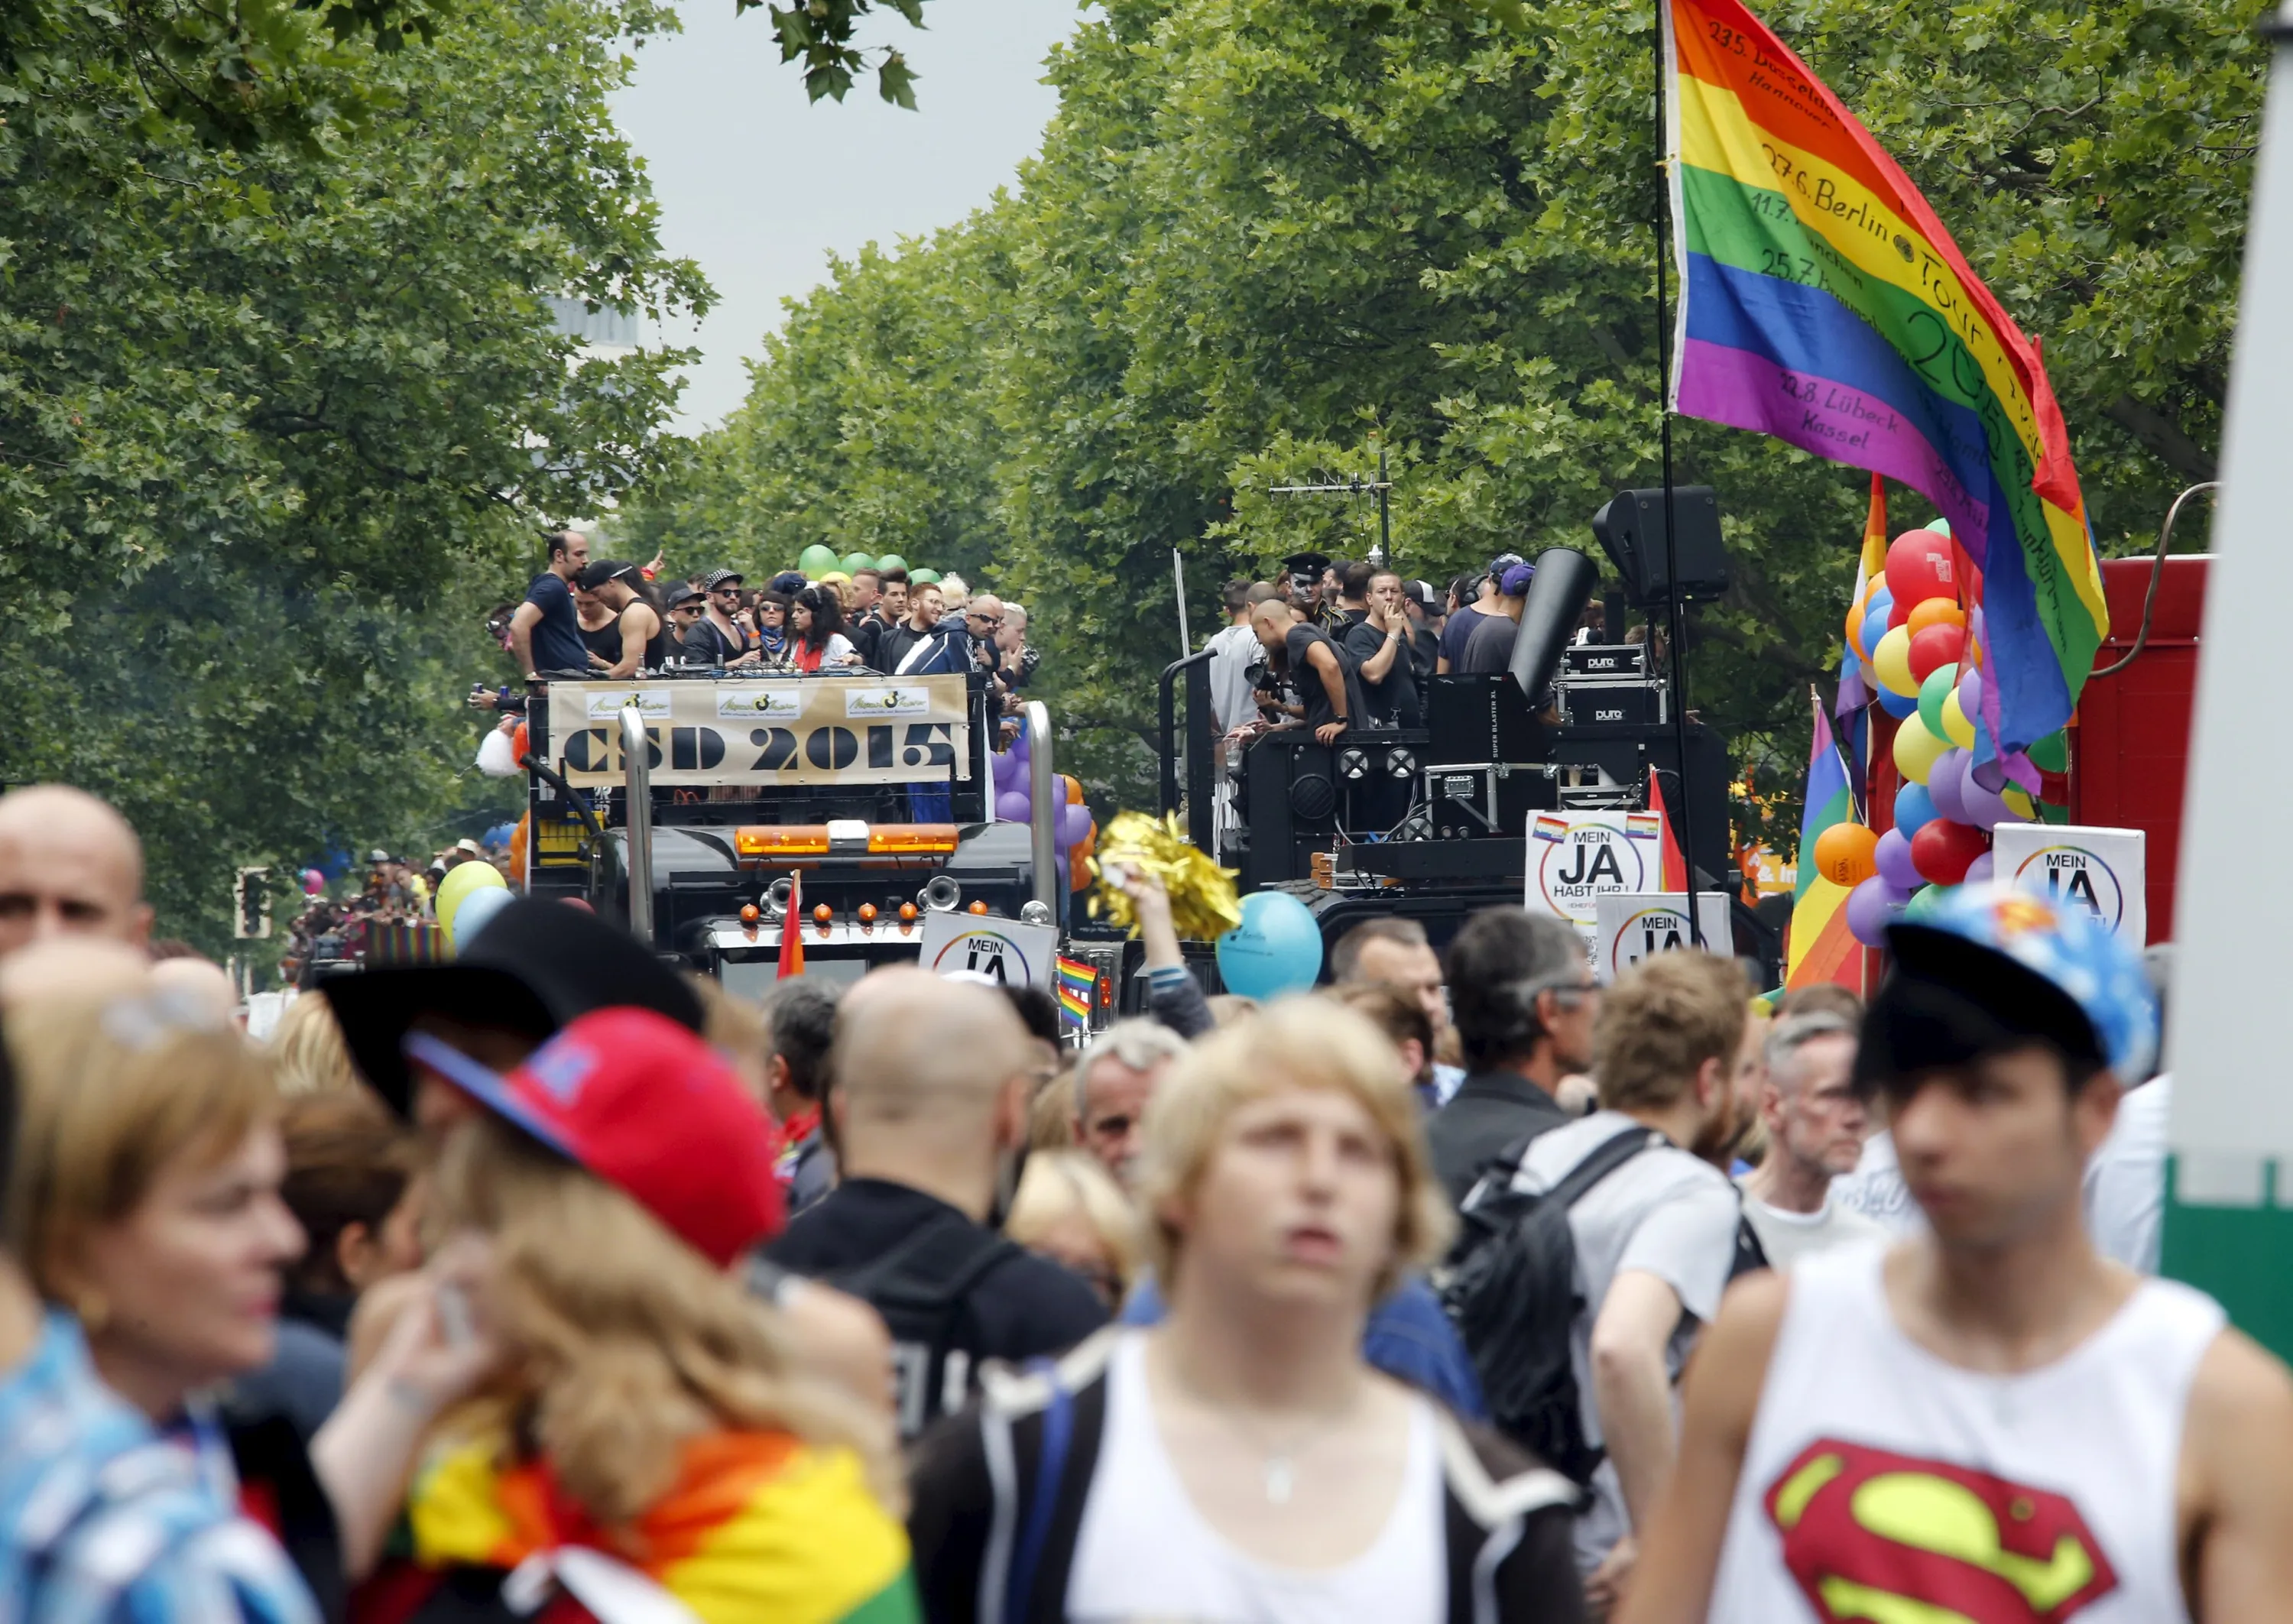 Annual Christopher Street Day Parade In Berlin